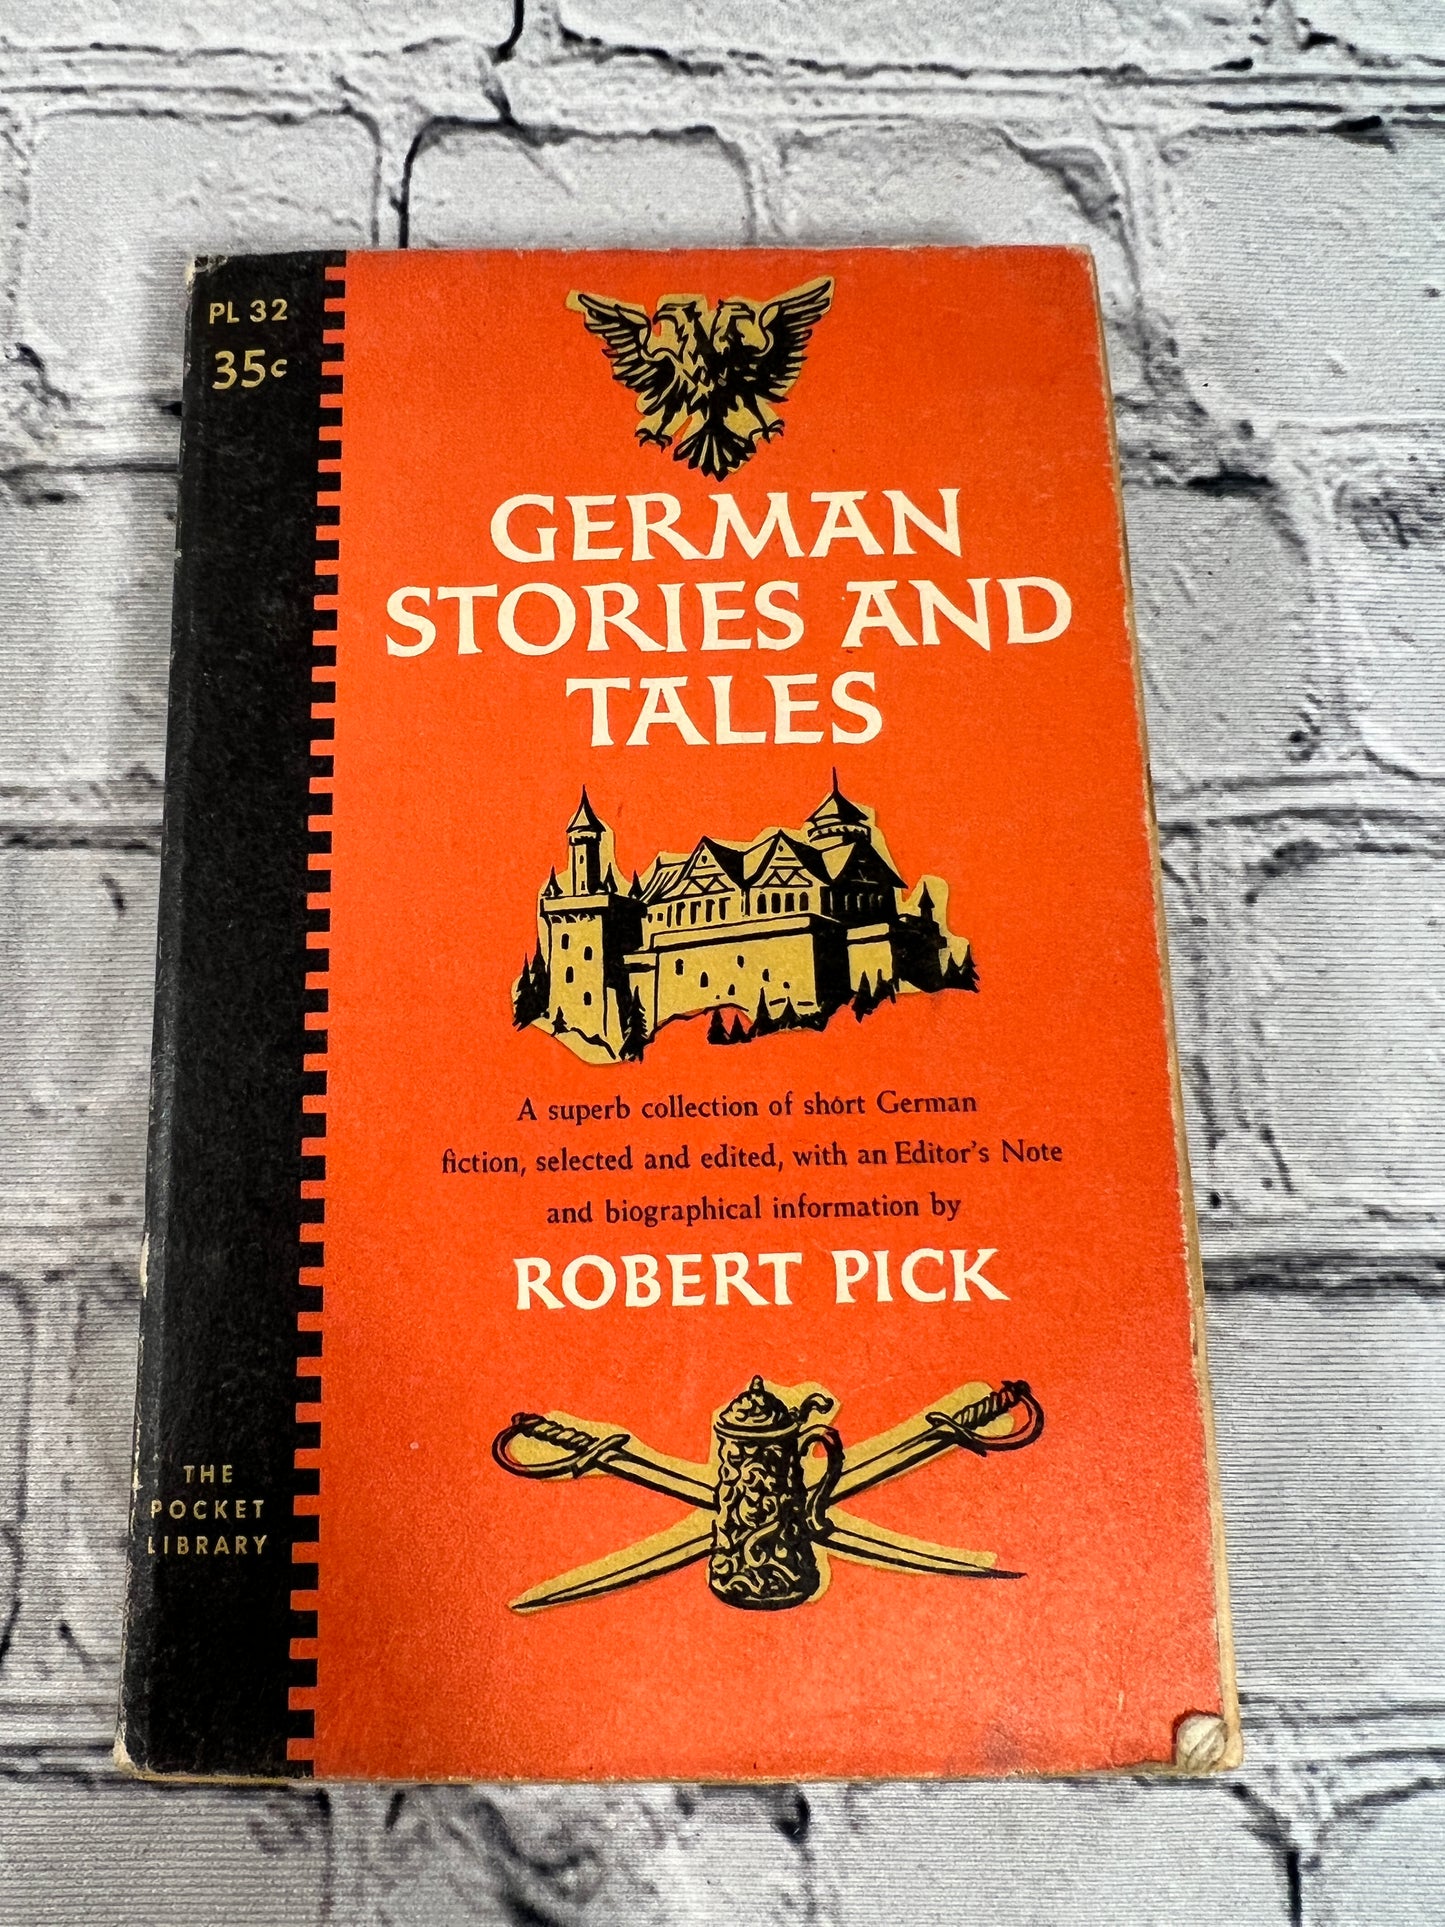 German Stories and Tales by Robert Pick [1955]